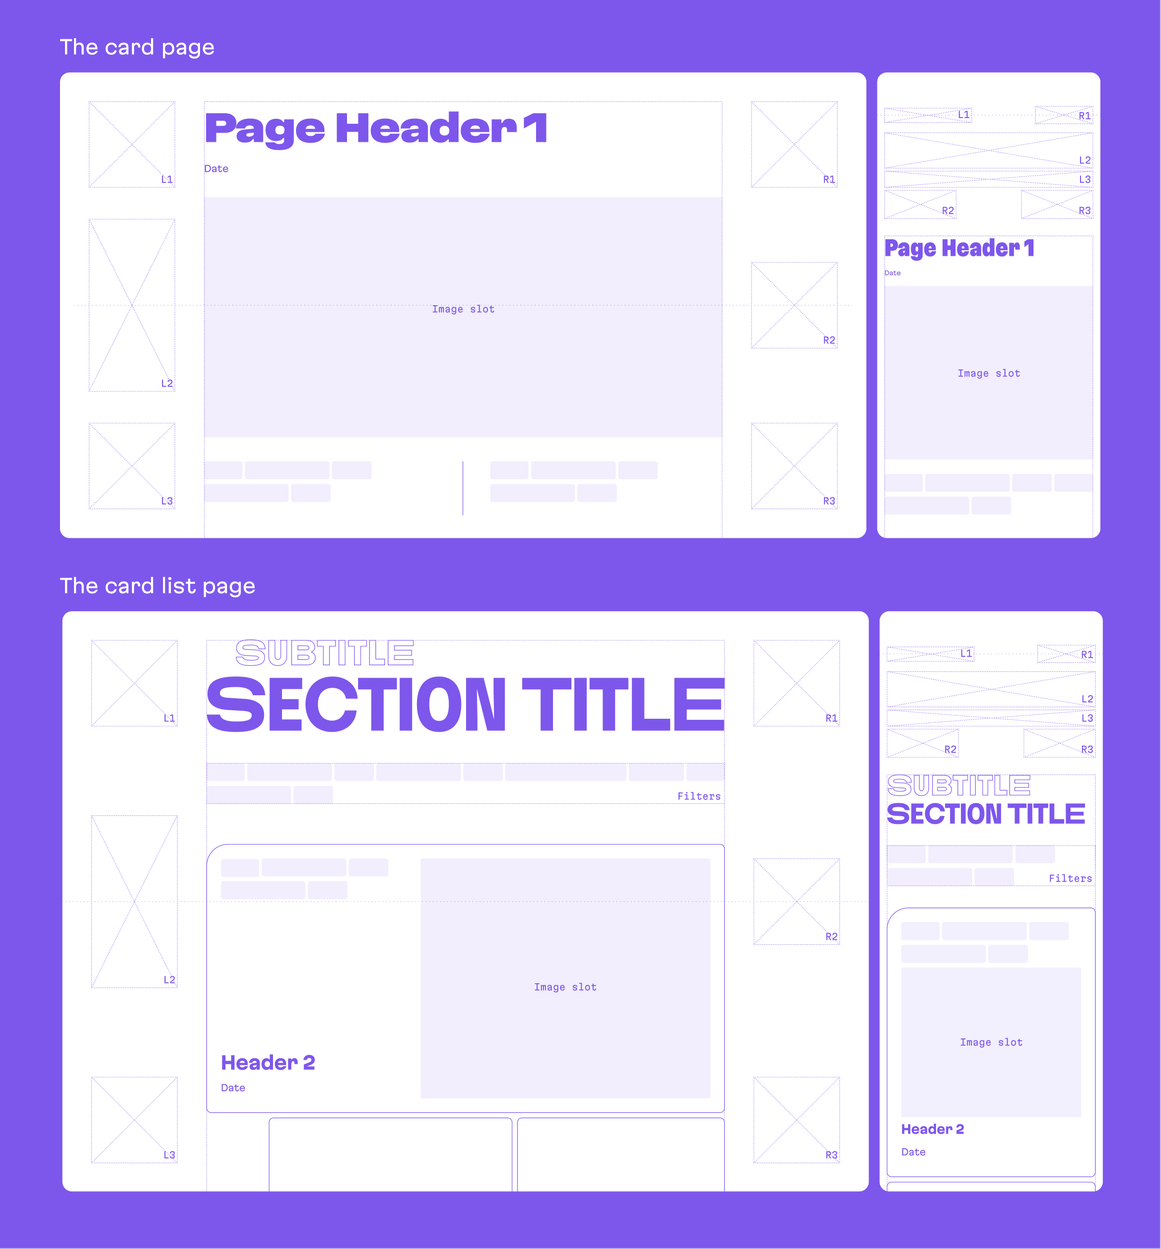 Two basic page templates, the card page, and the card list page